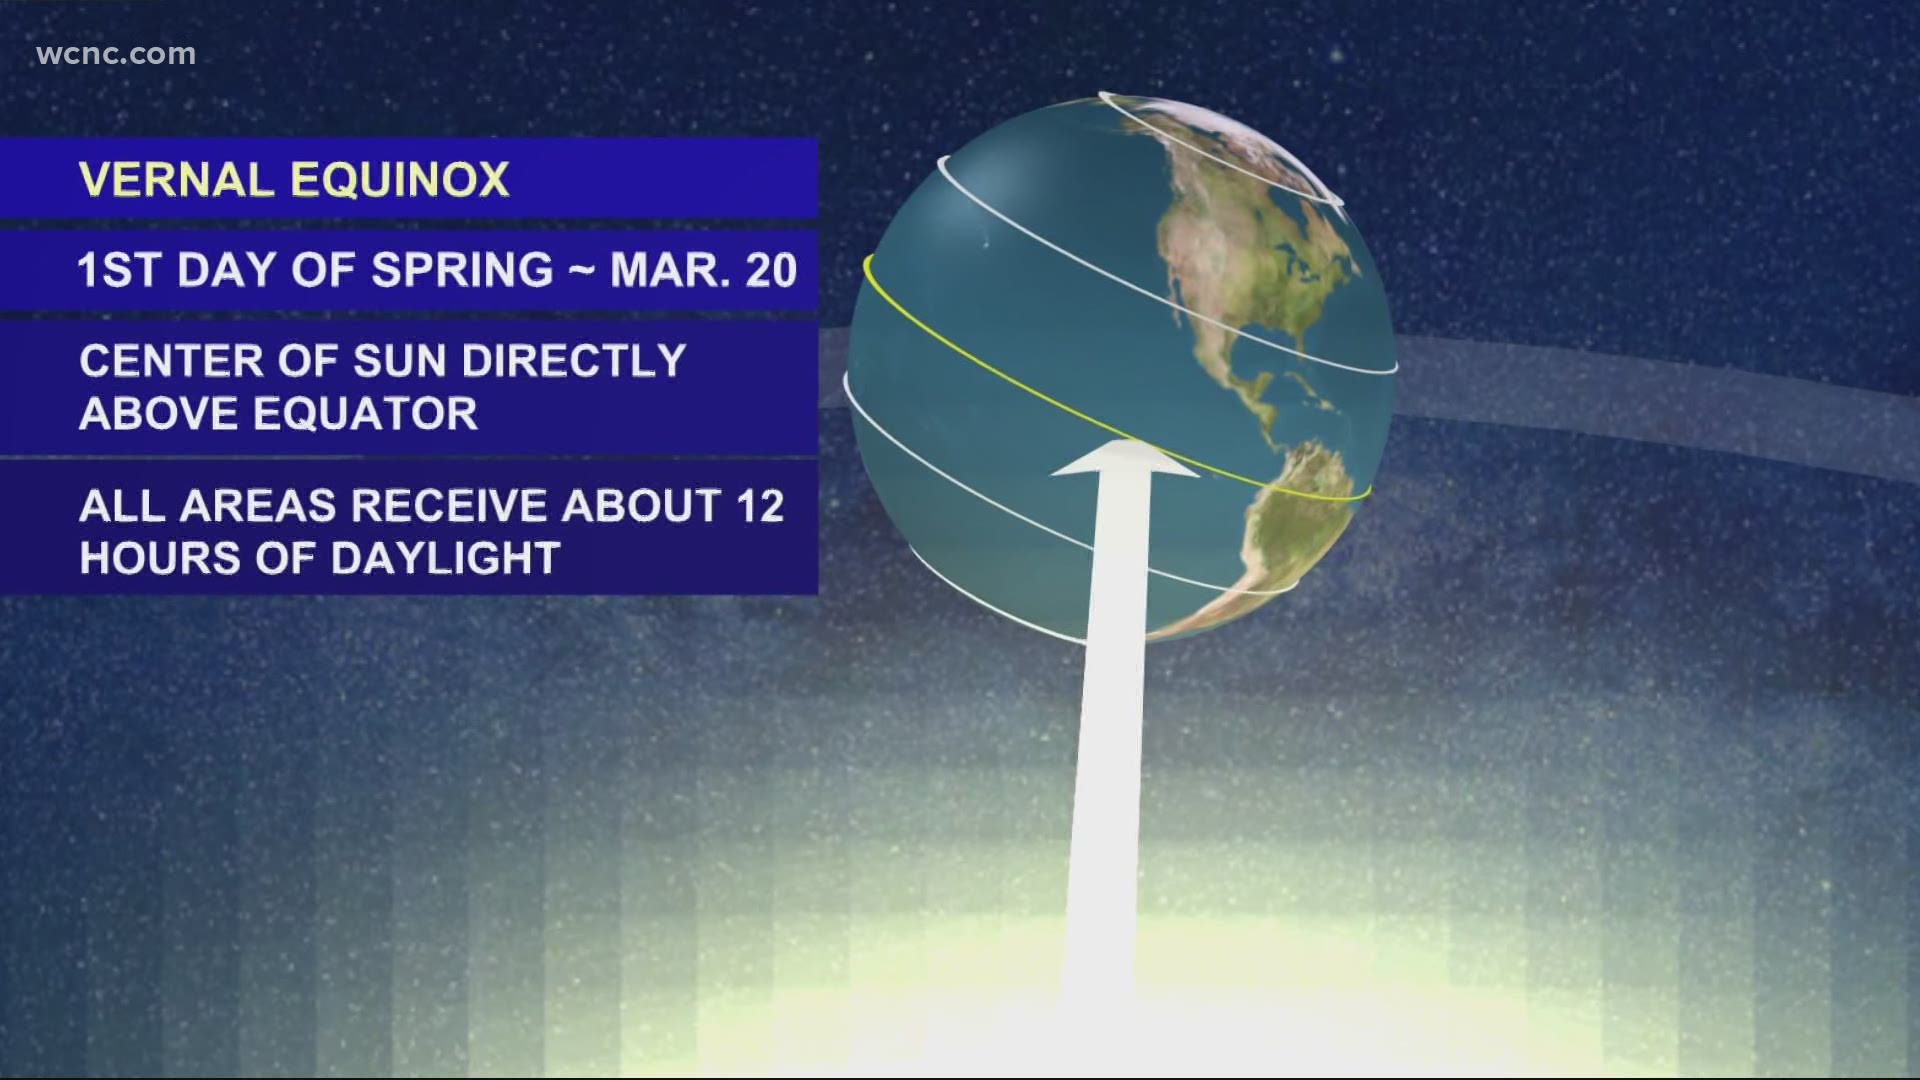 Why is it different than the vernal equinox?